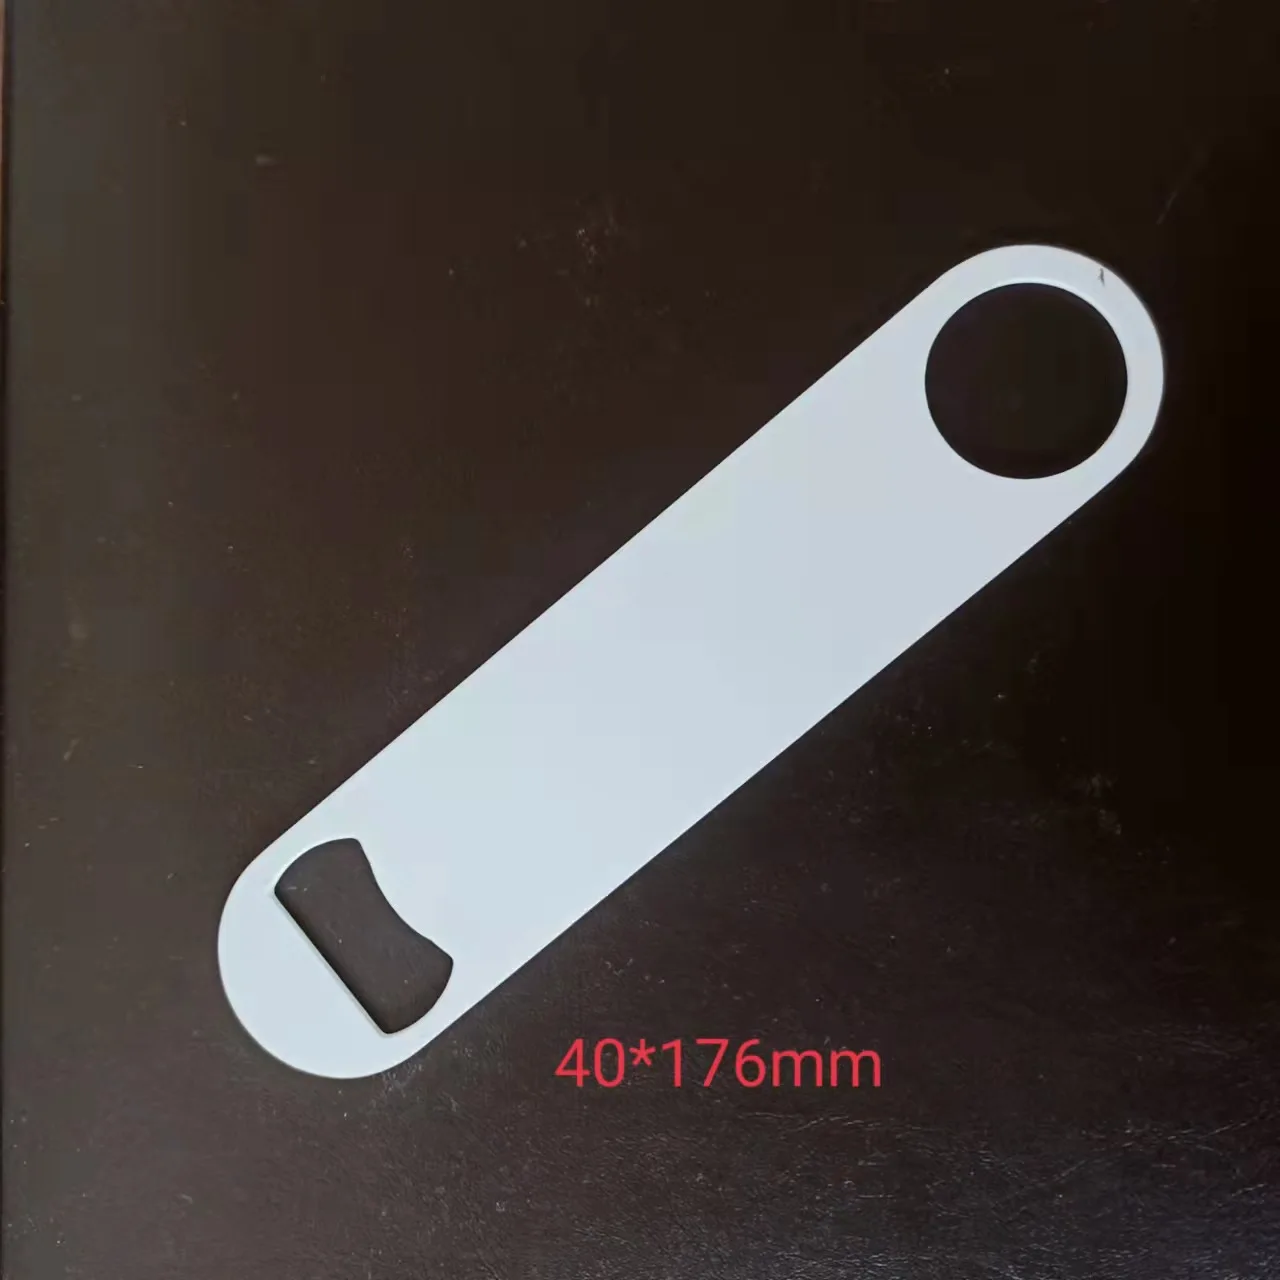 Factory Price!!! 100pcs/lot Bottle Beer Opener Cap Lifter Sublimation Blank White Dye INK Printing Heat Transfer High Quality free shipping 100pcs lot low price wholesale ballpoint pen customized logo heat transfer blank white pen